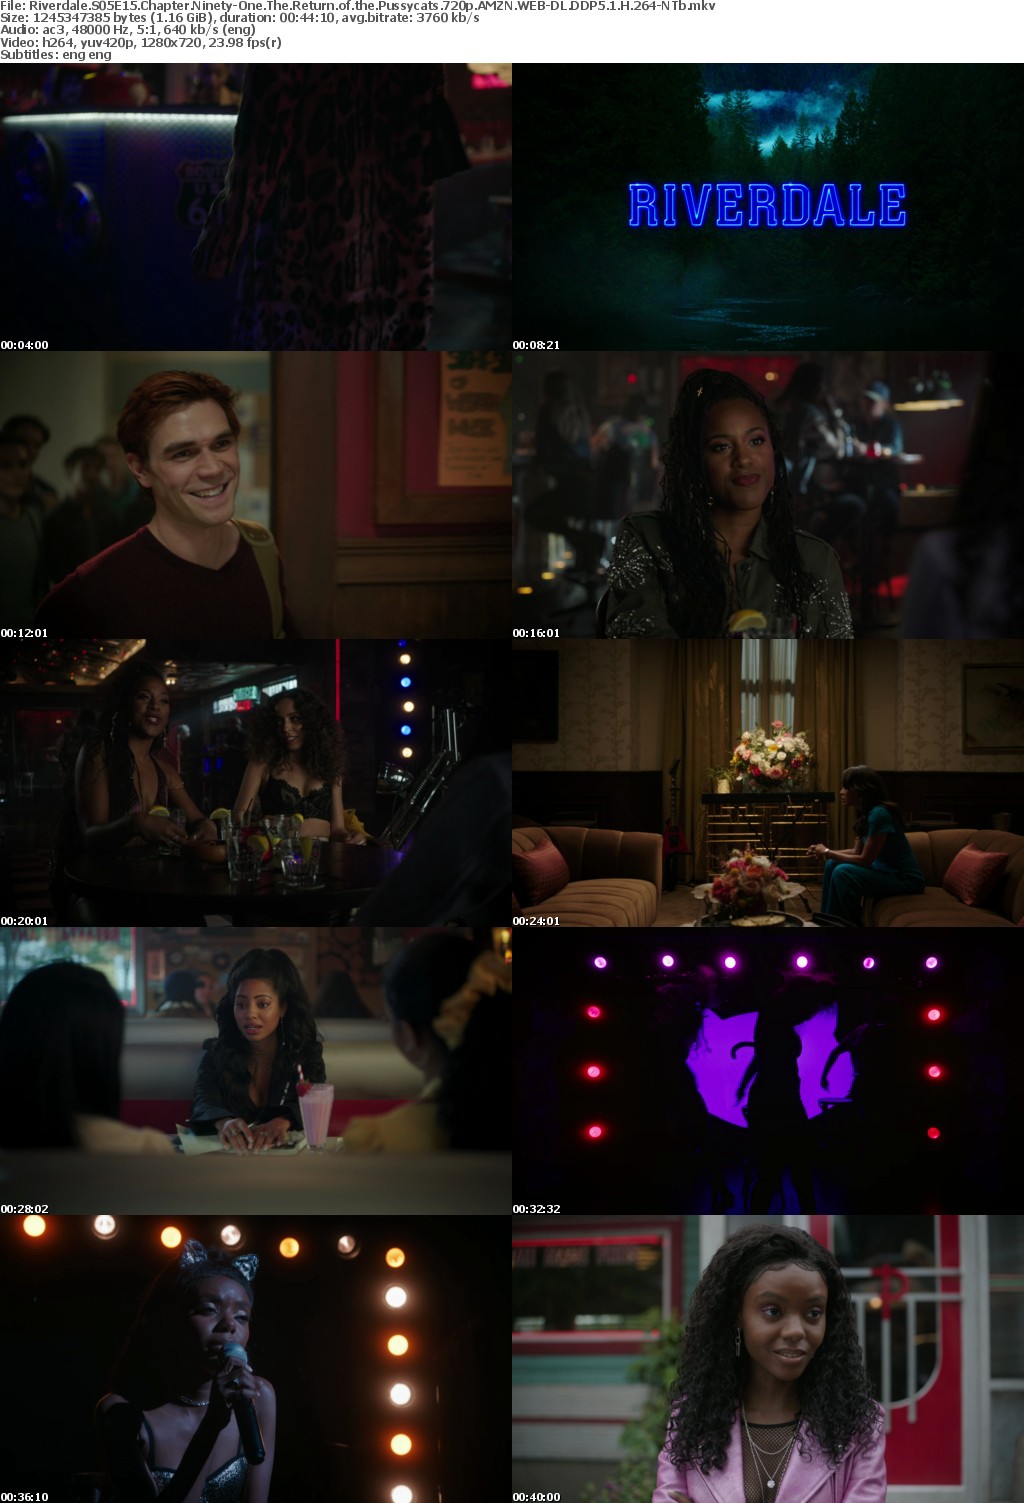 Riverdale US S05E15 Chapter Ninety-One The Return of the Pussycats 720p AMZN WEBRip DDP5 1 x264-NTb